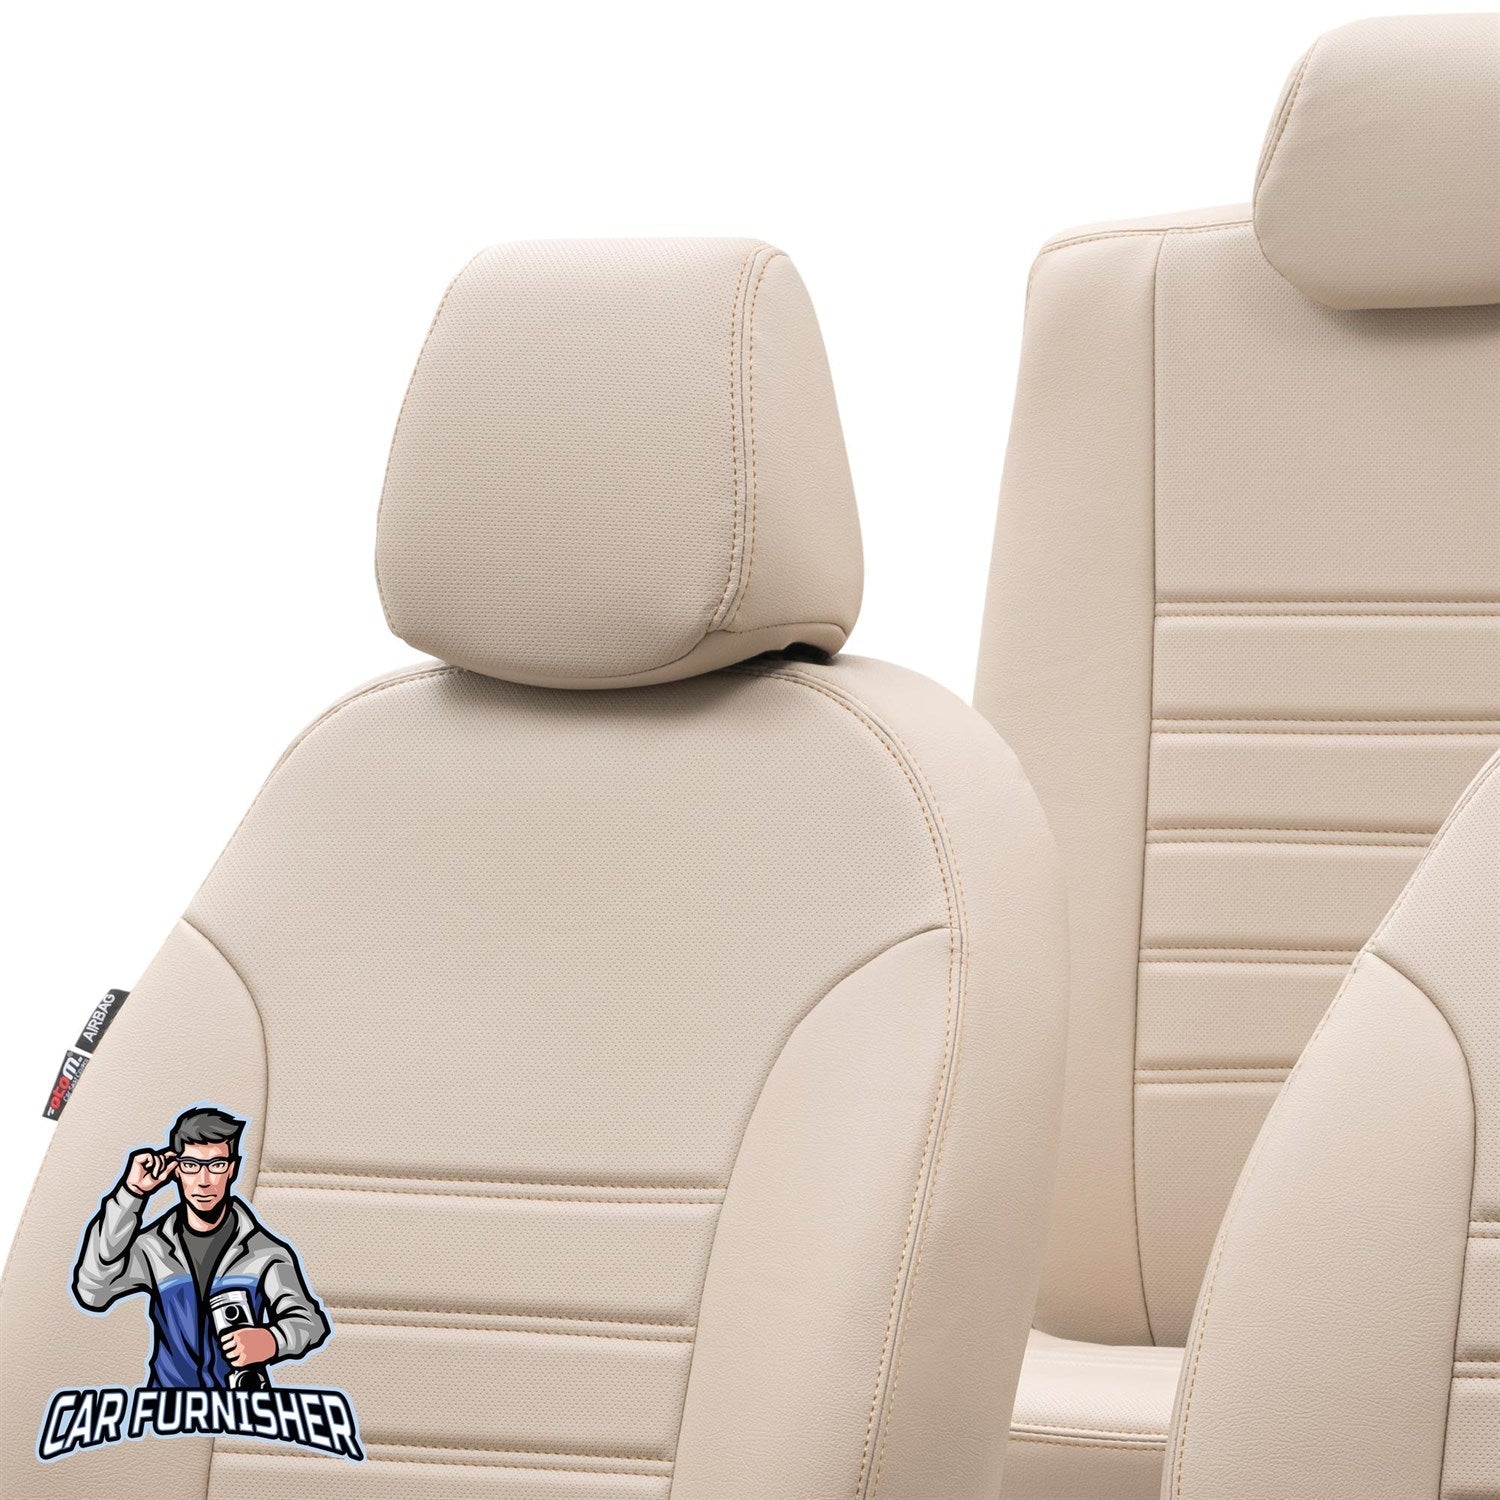 Honda CRV Seat Covers Istanbul Leather Design Beige Leather